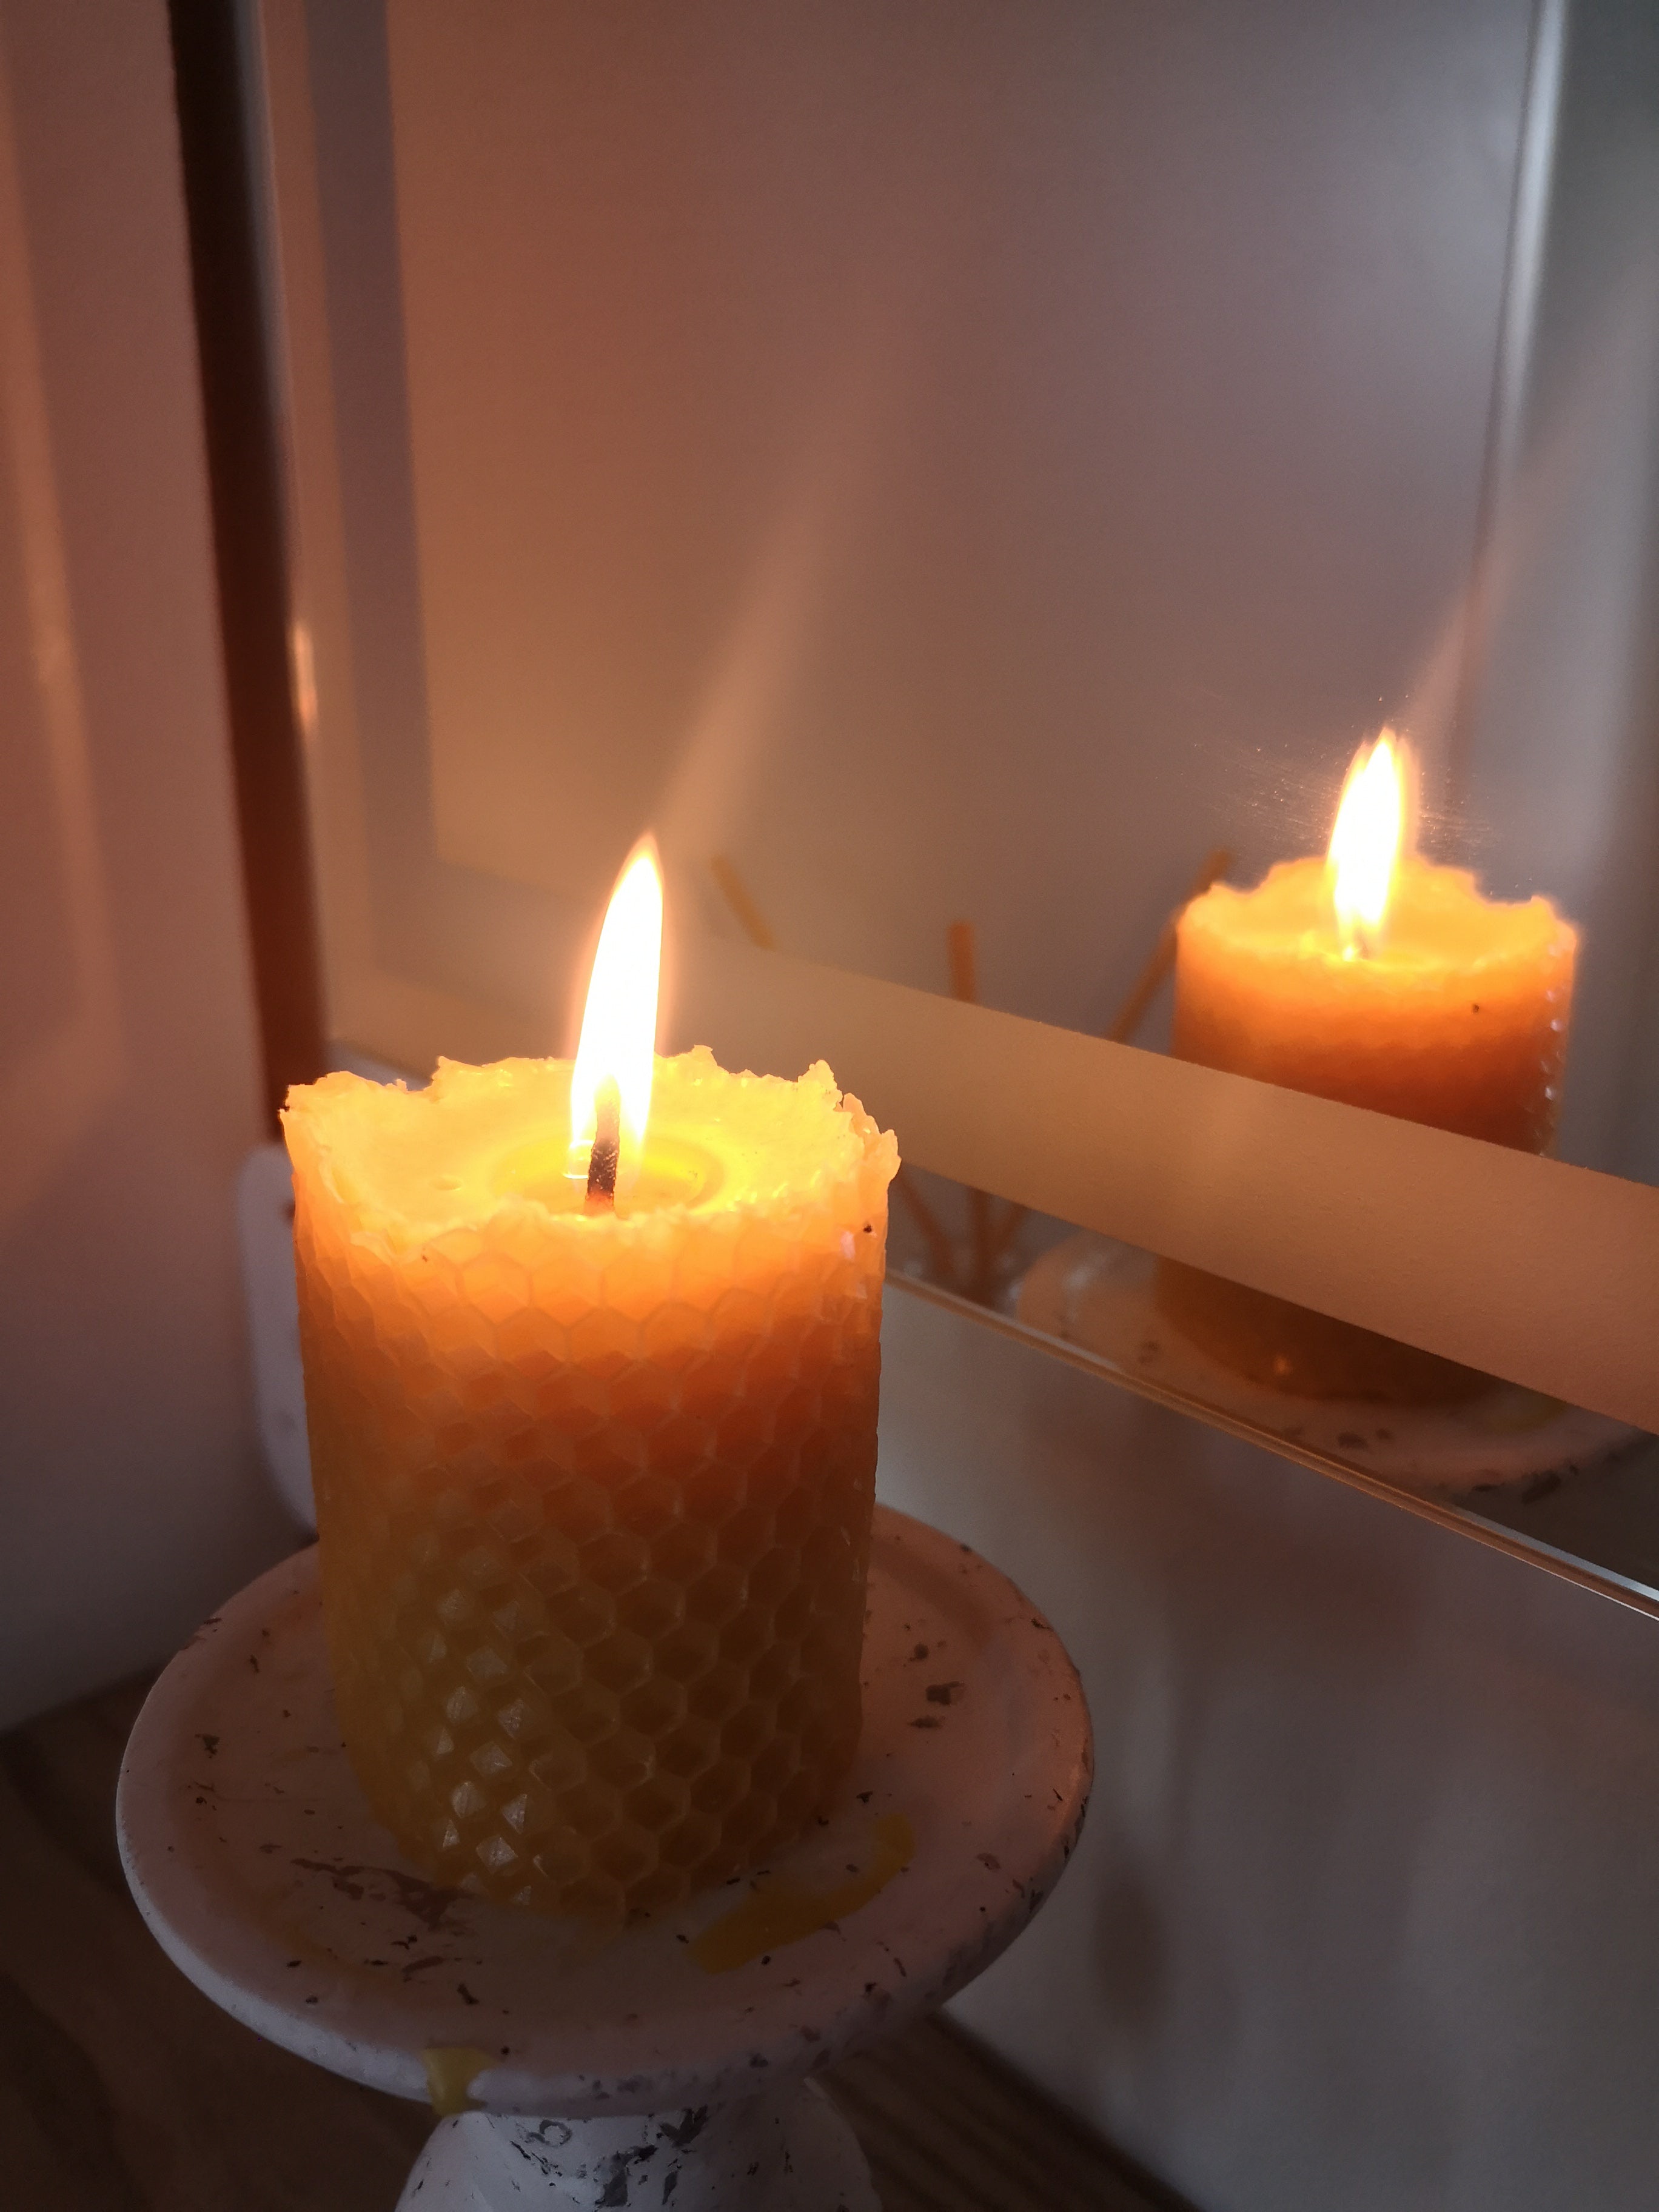 Burning beeswax candle next to mirror